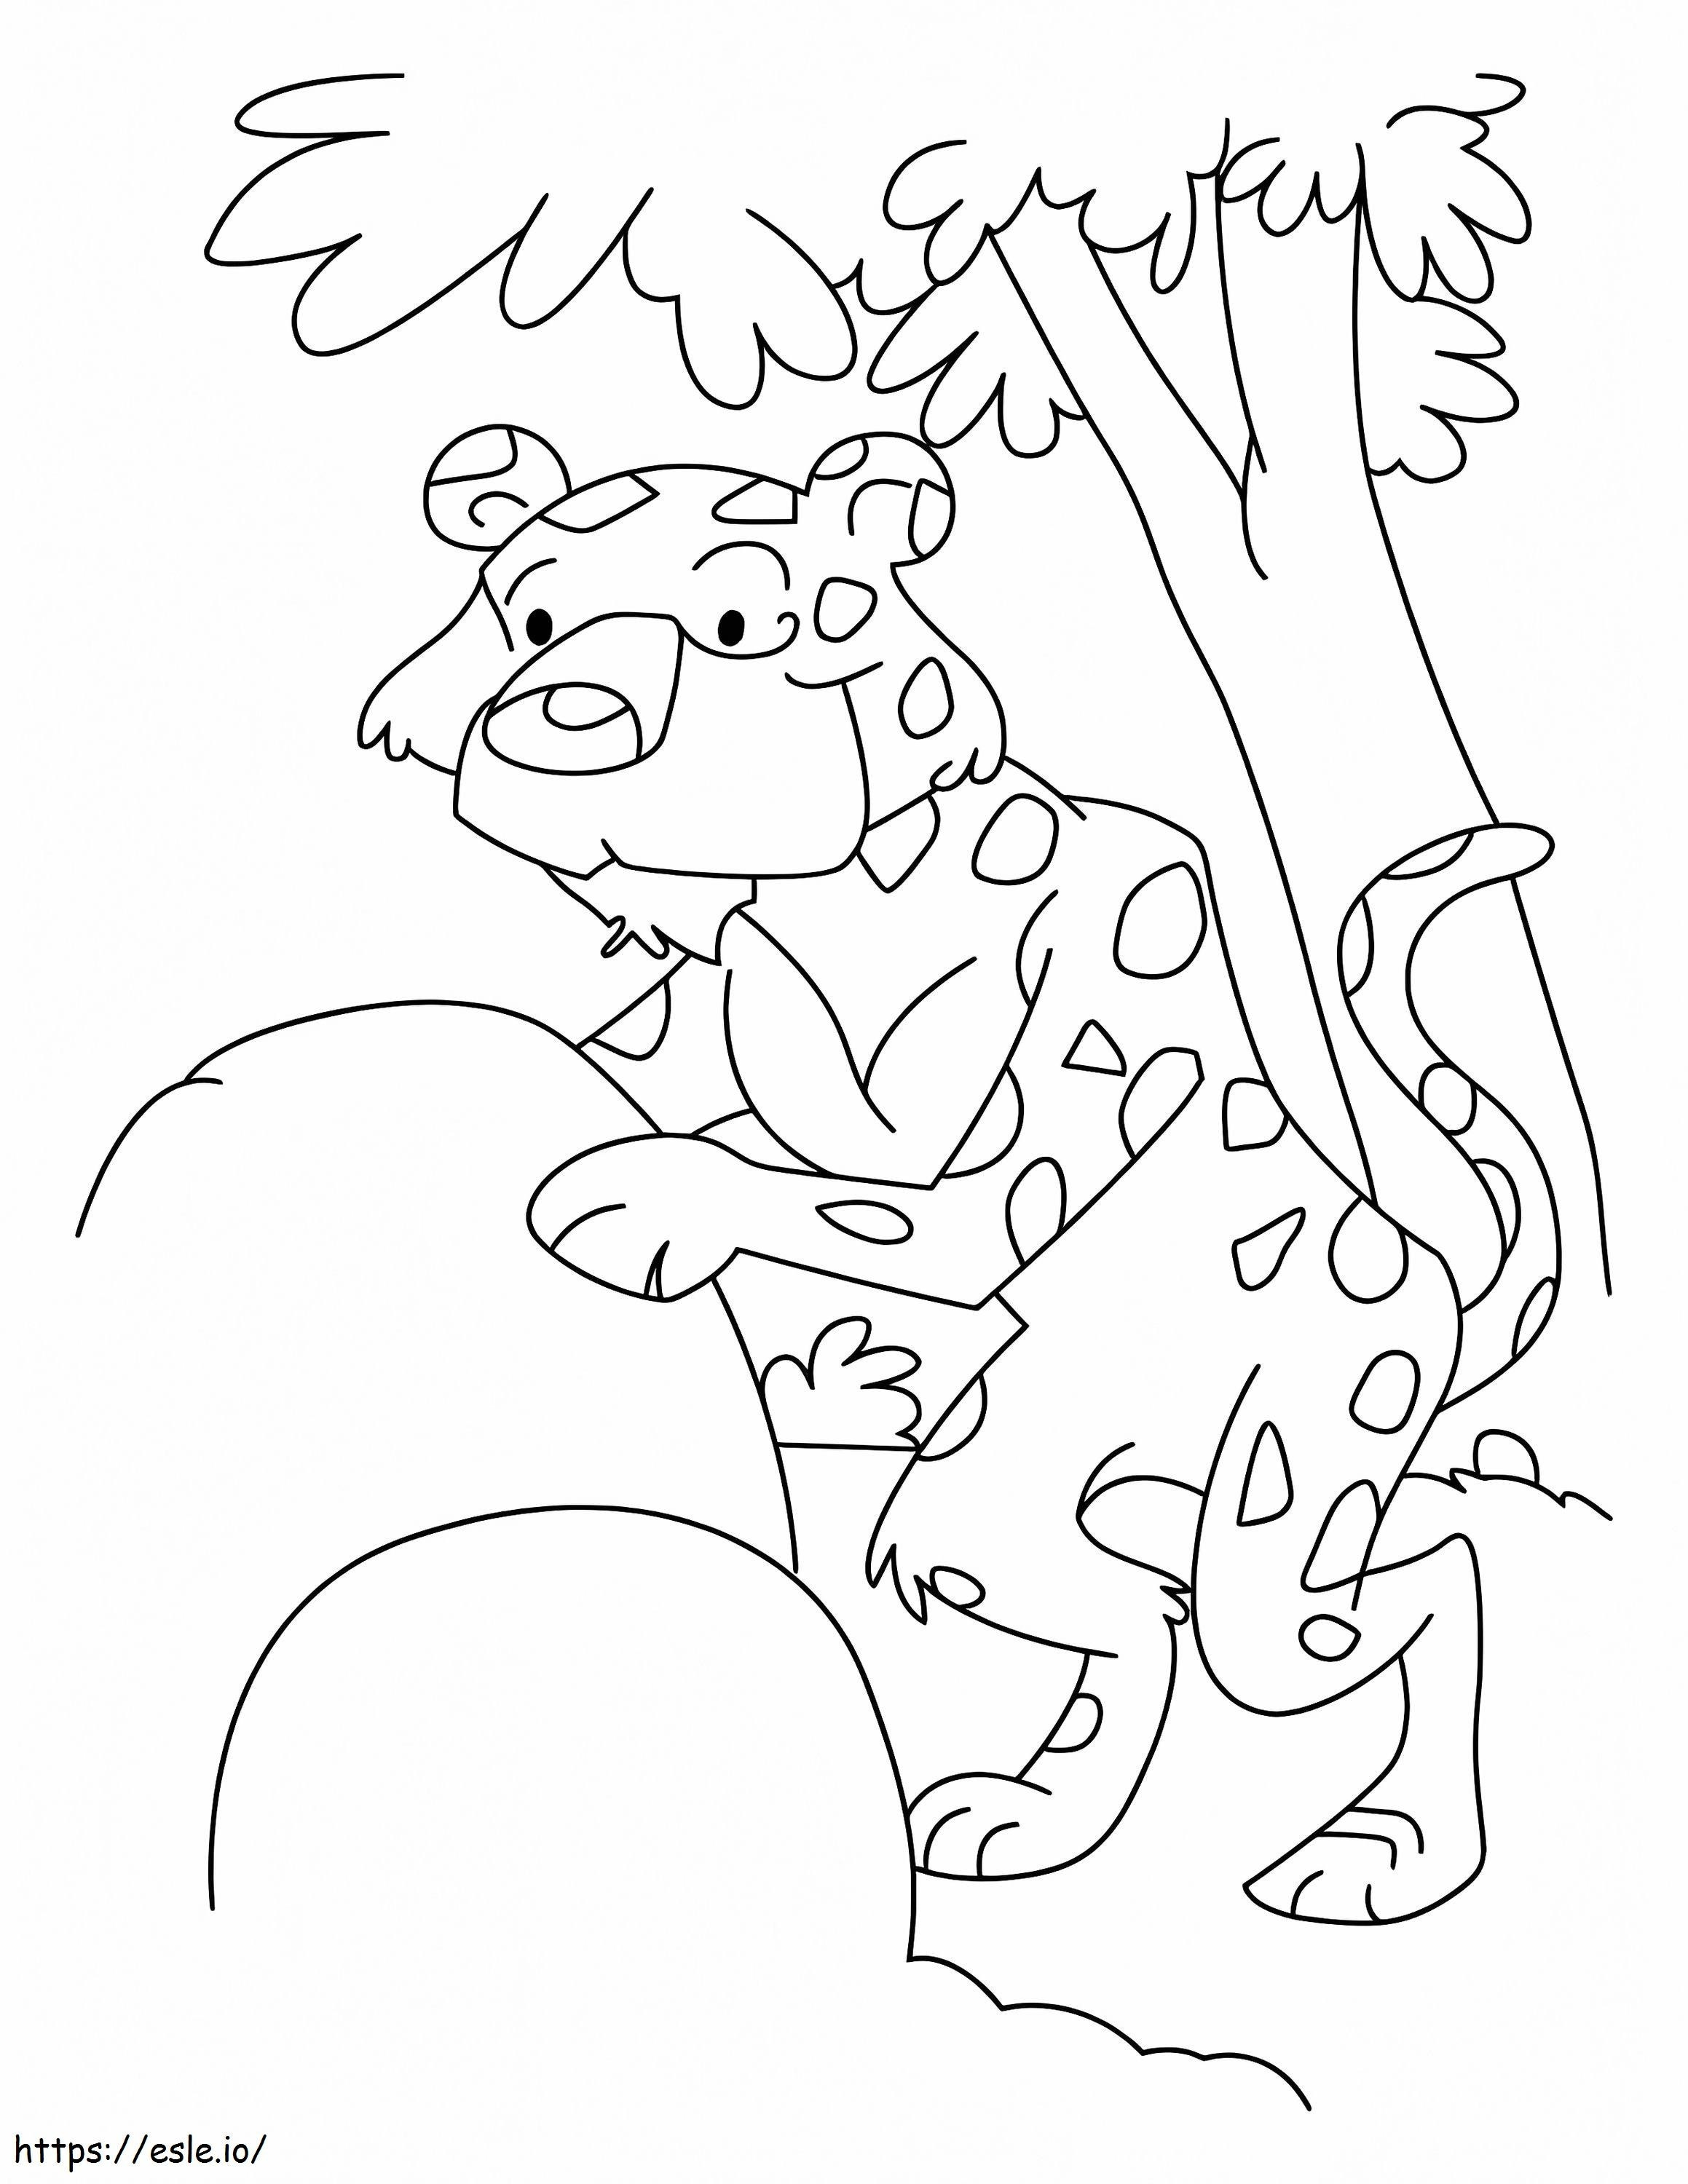 Funny Leopard coloring page